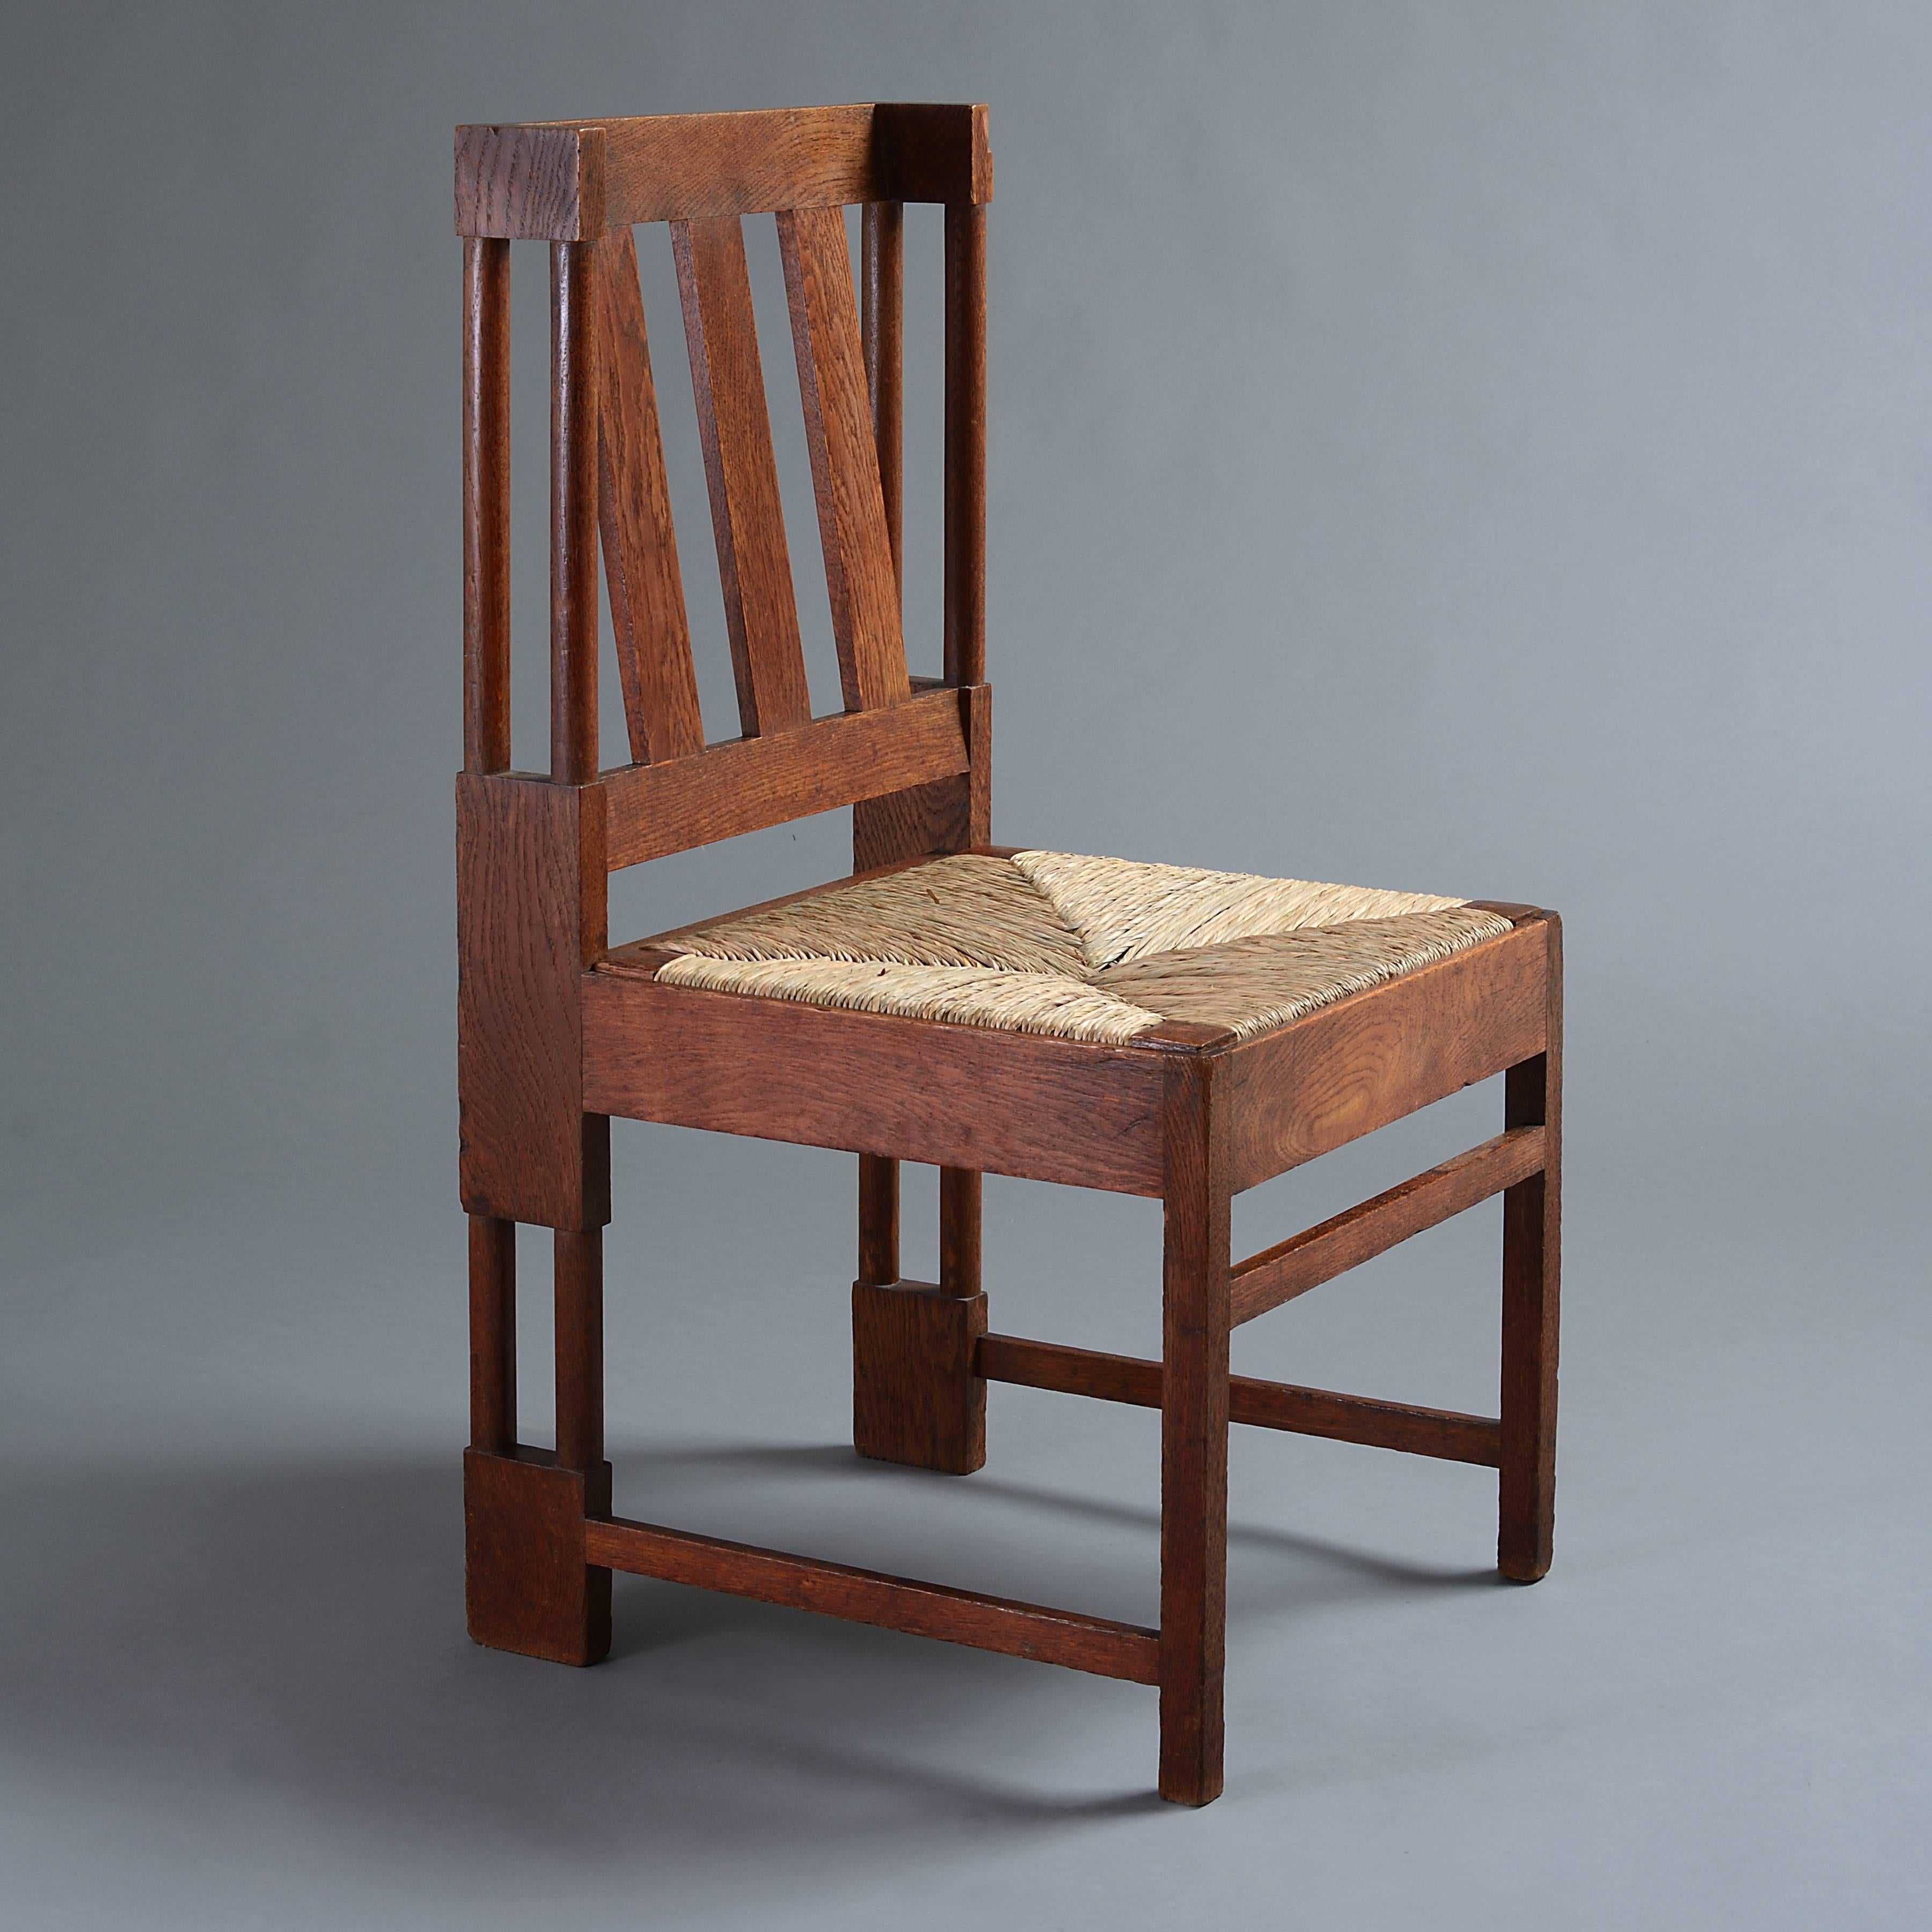 An unusual pair of Arts & Crafts oak chairs, circa 1910.